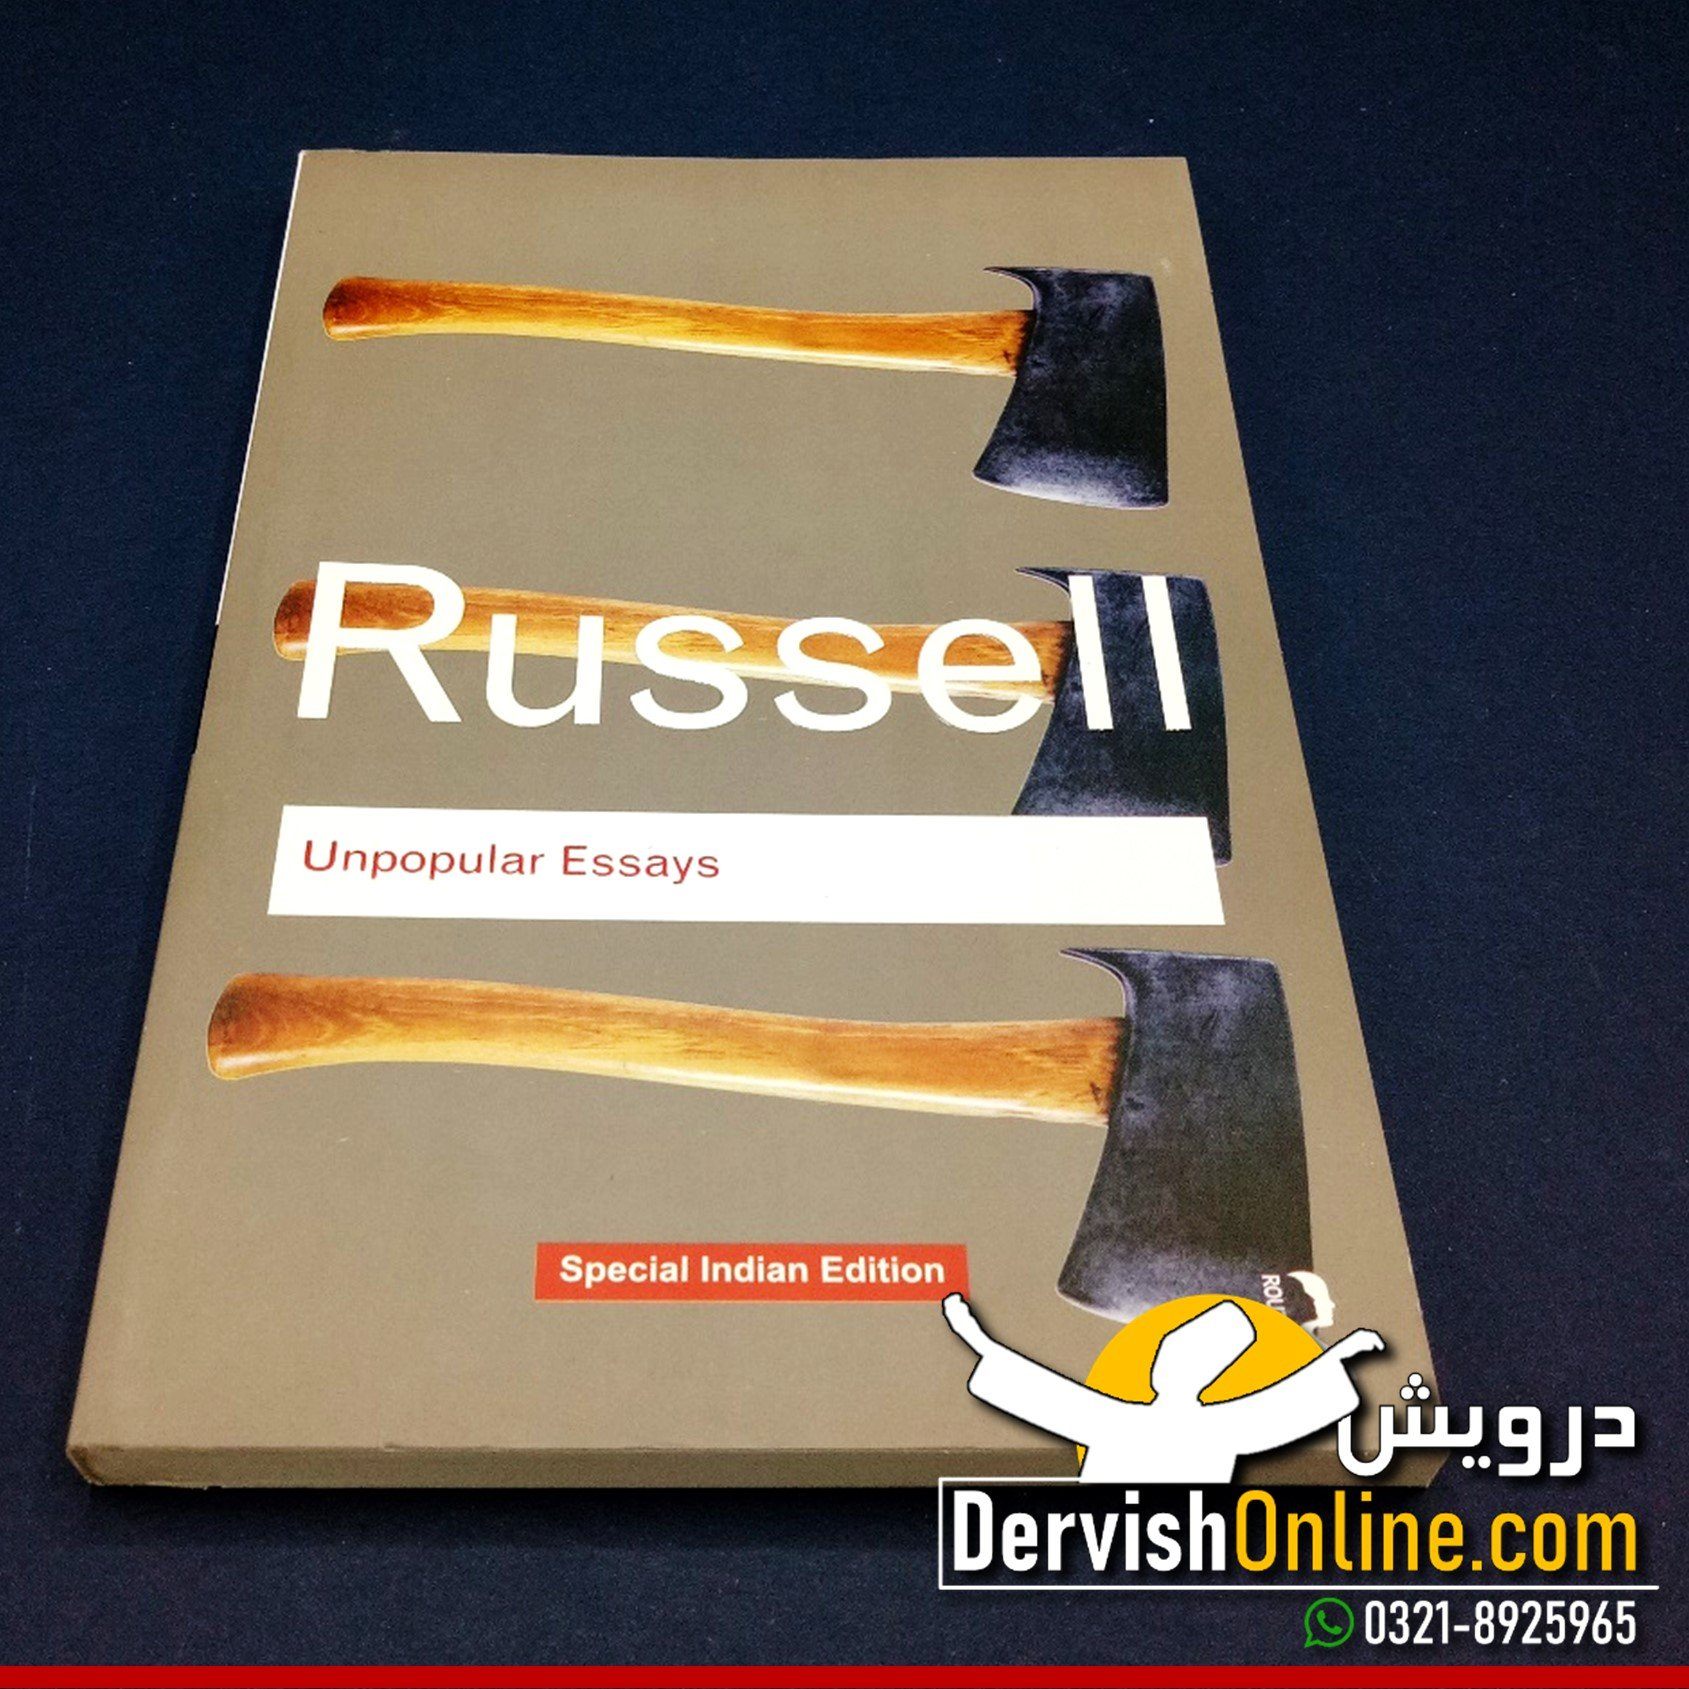 essays by bertrand russell